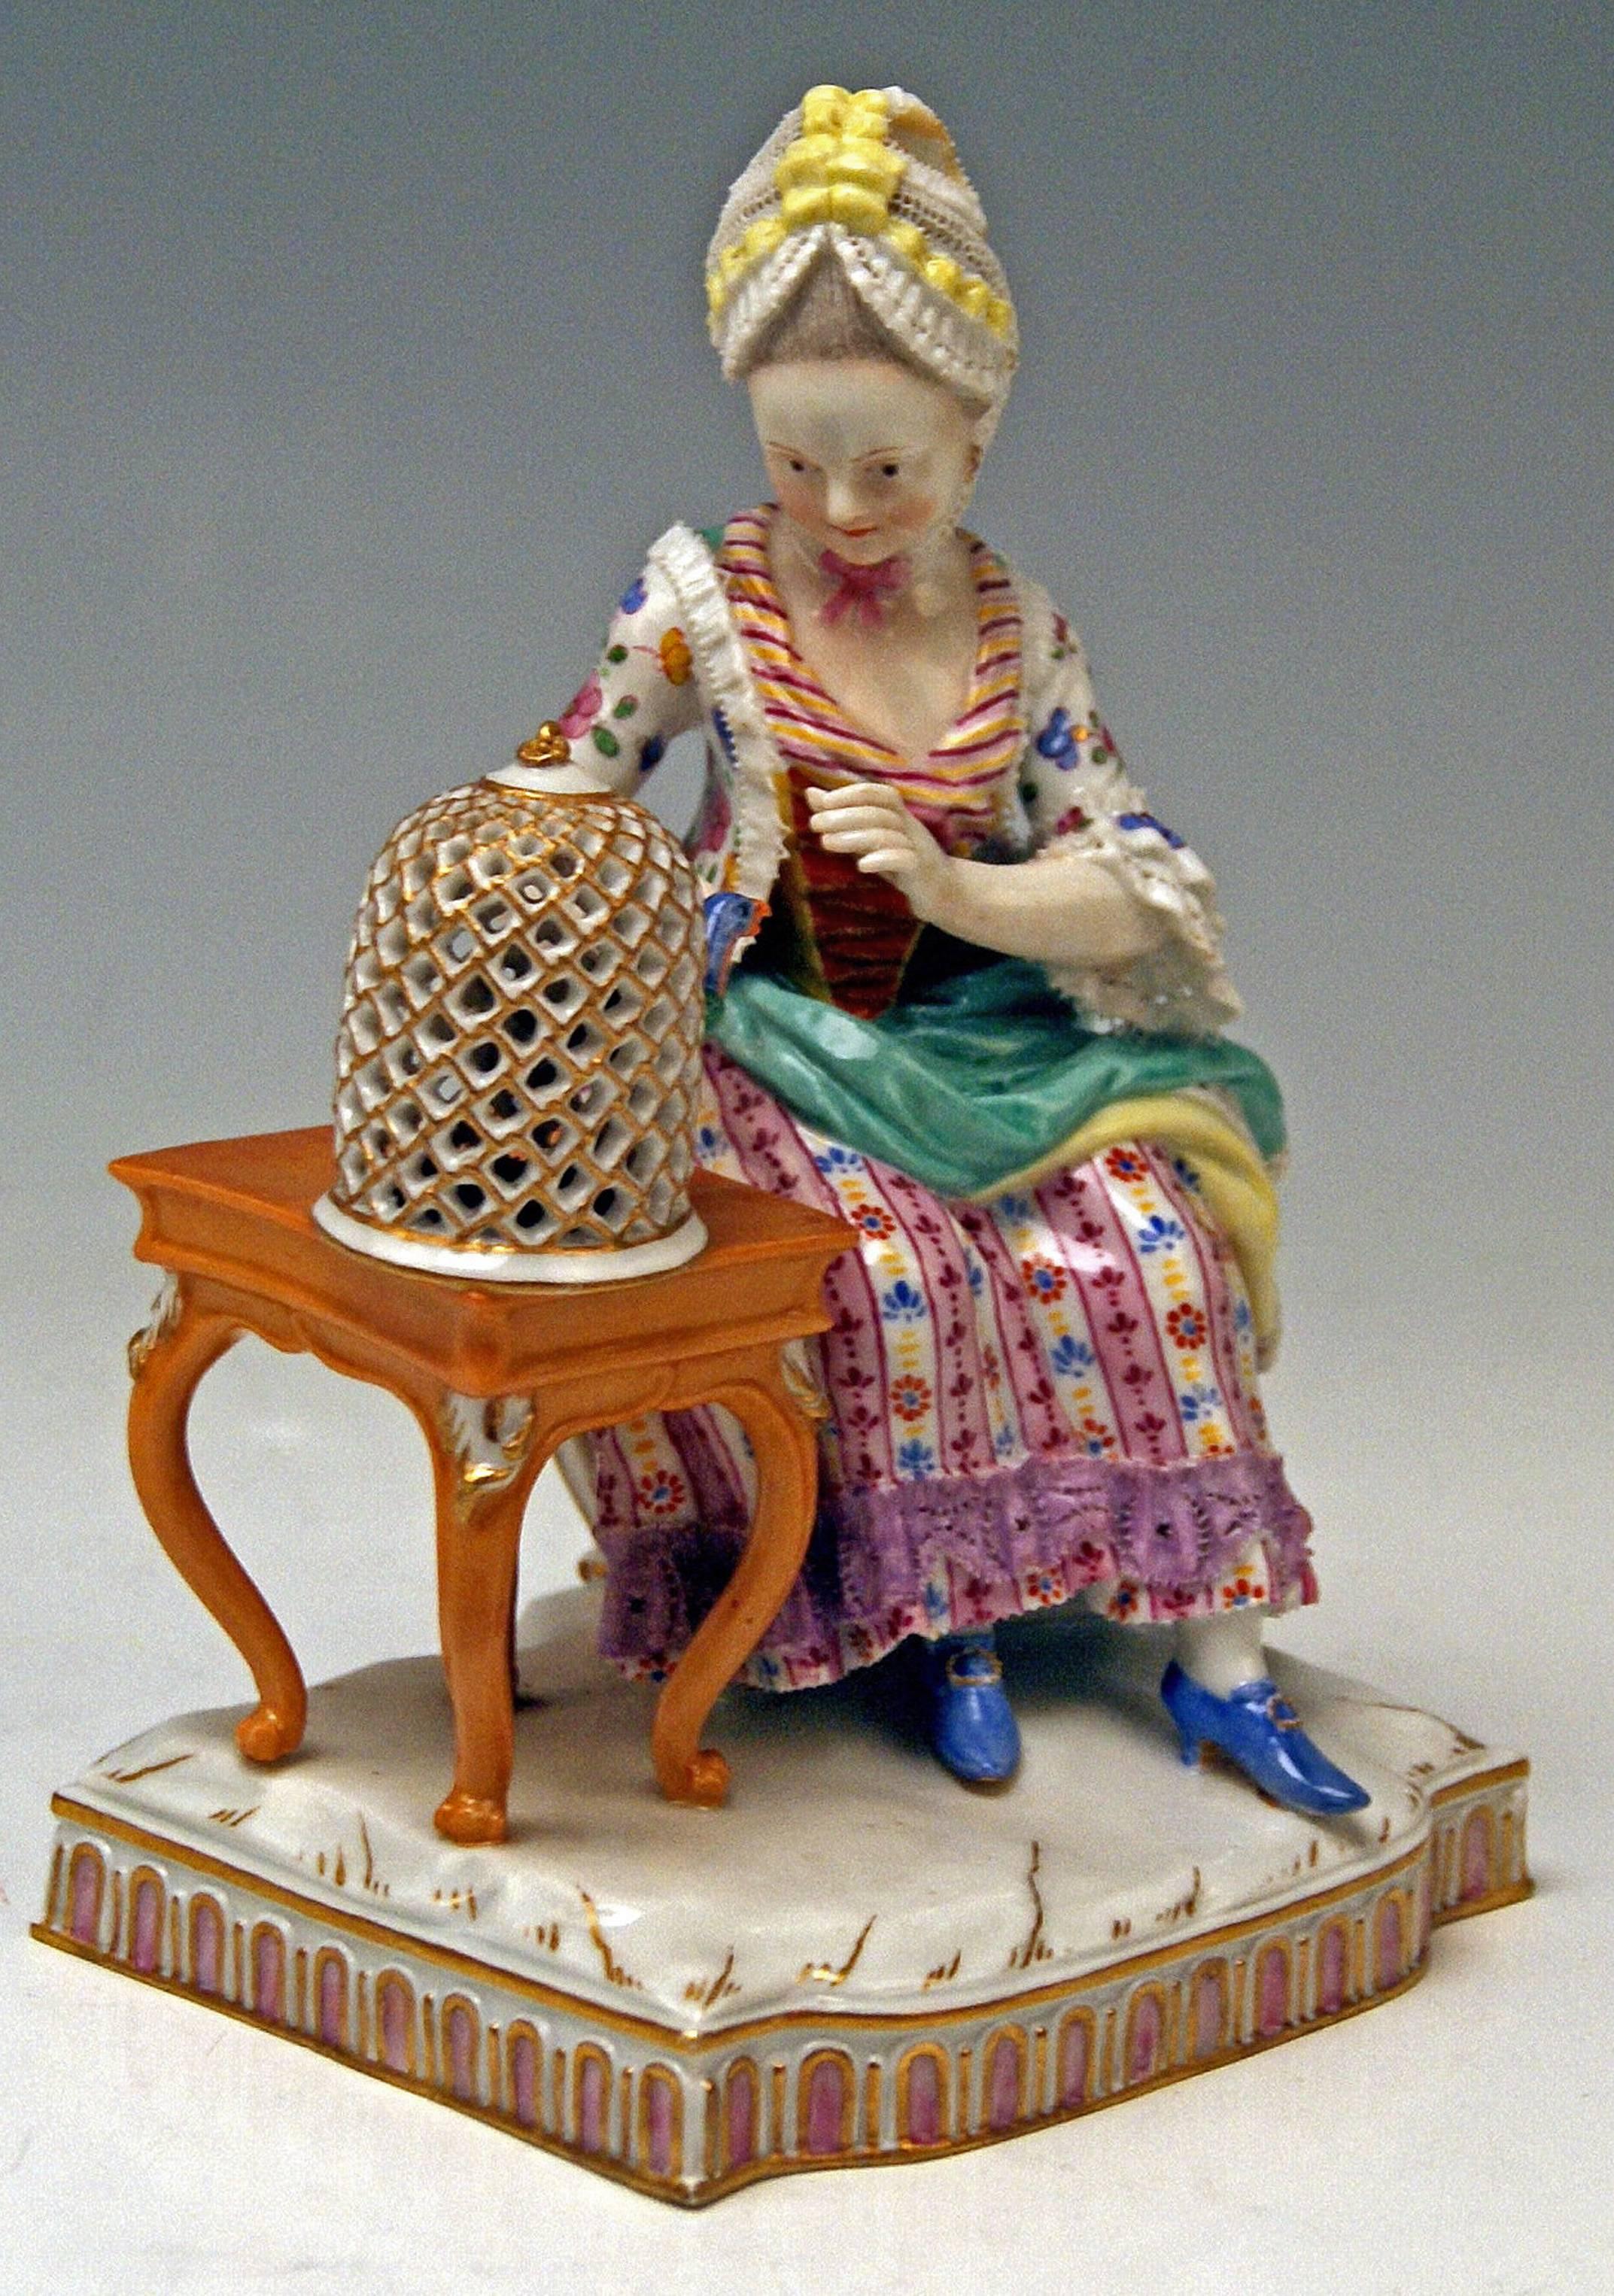 Meissen lovely figurine deriving from the series of five senses:
°E4 The Feeling

Measures/dimensions:
height 16.0 cm = 6.29 inches
measures of base
10.0 x 8.0 cm = 3.93 x 3.14 inches 

Manufactory: Meissen
Hallmarked: Blue Meissen Sword